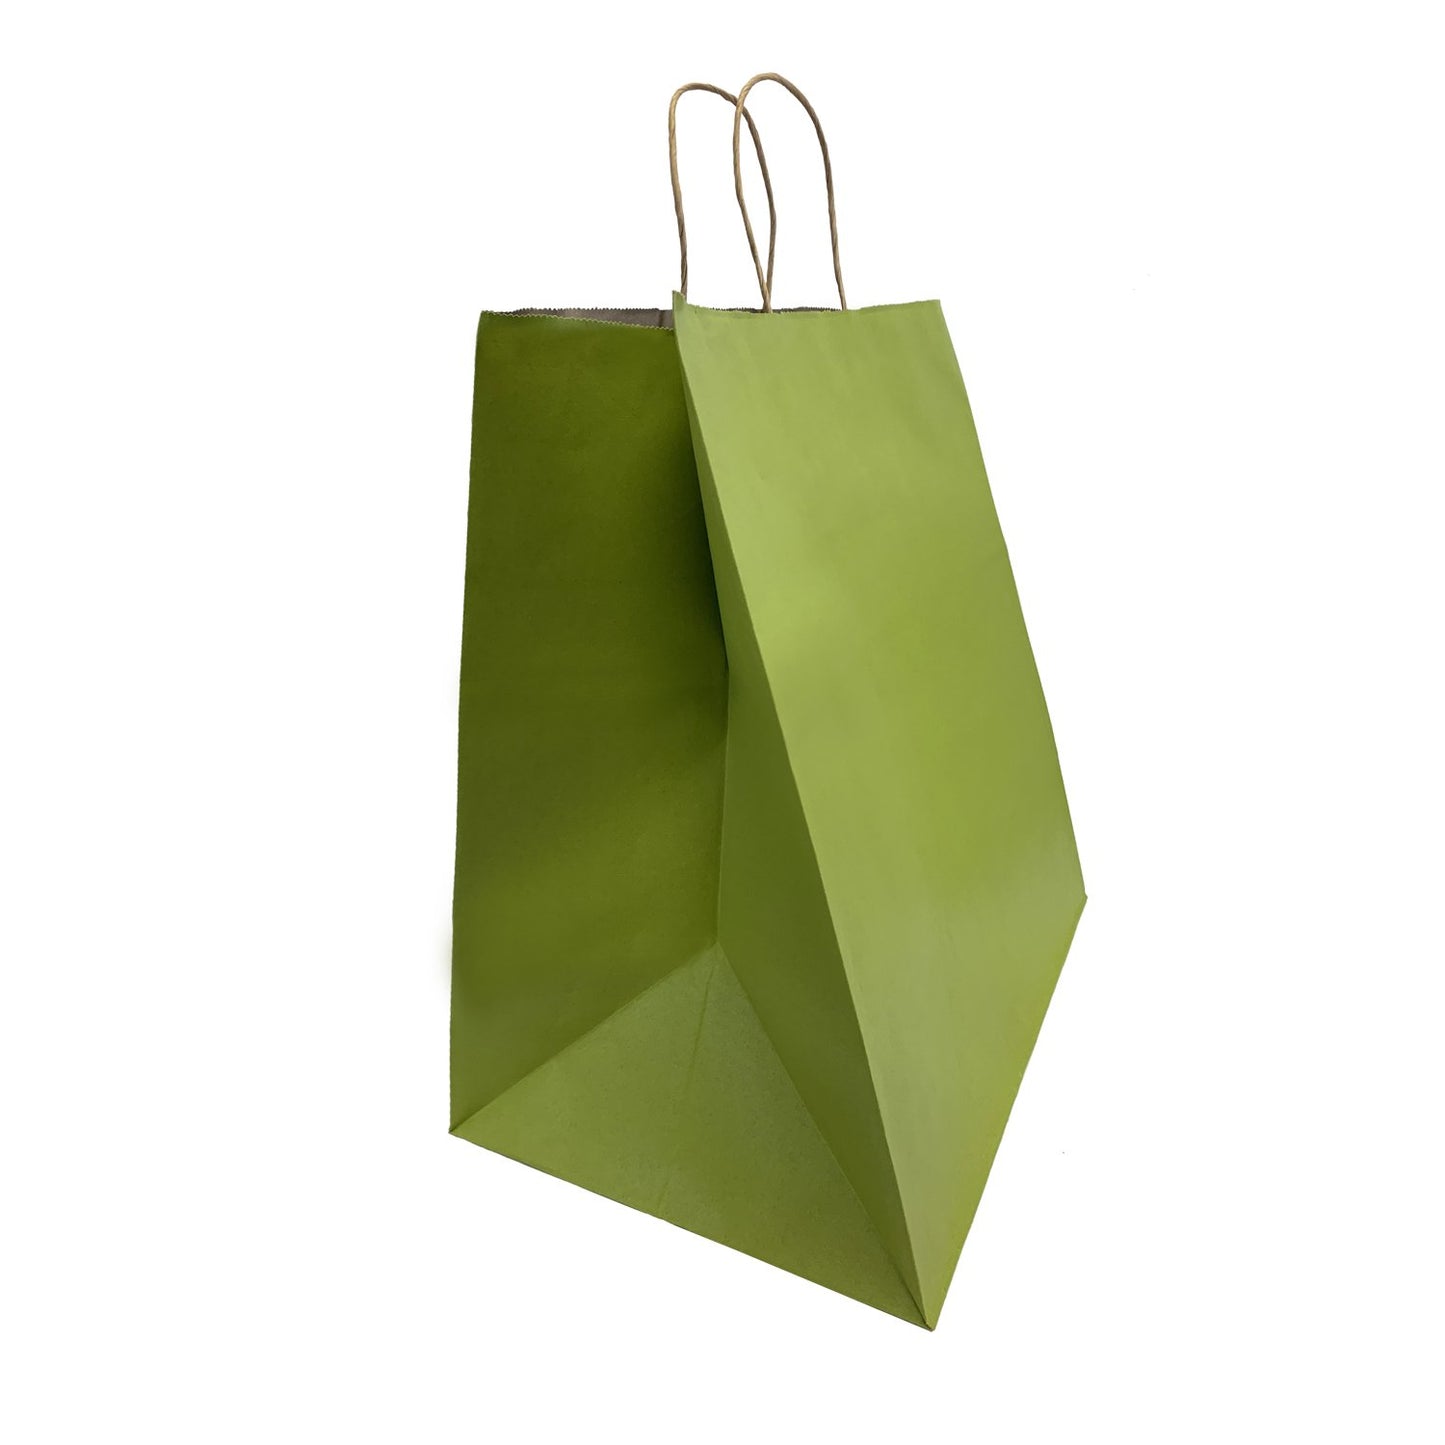 200 Pcs, Super Royal, 14x10x15.75 inches, Lime Kraft Paper Bags, with Twisted Handle